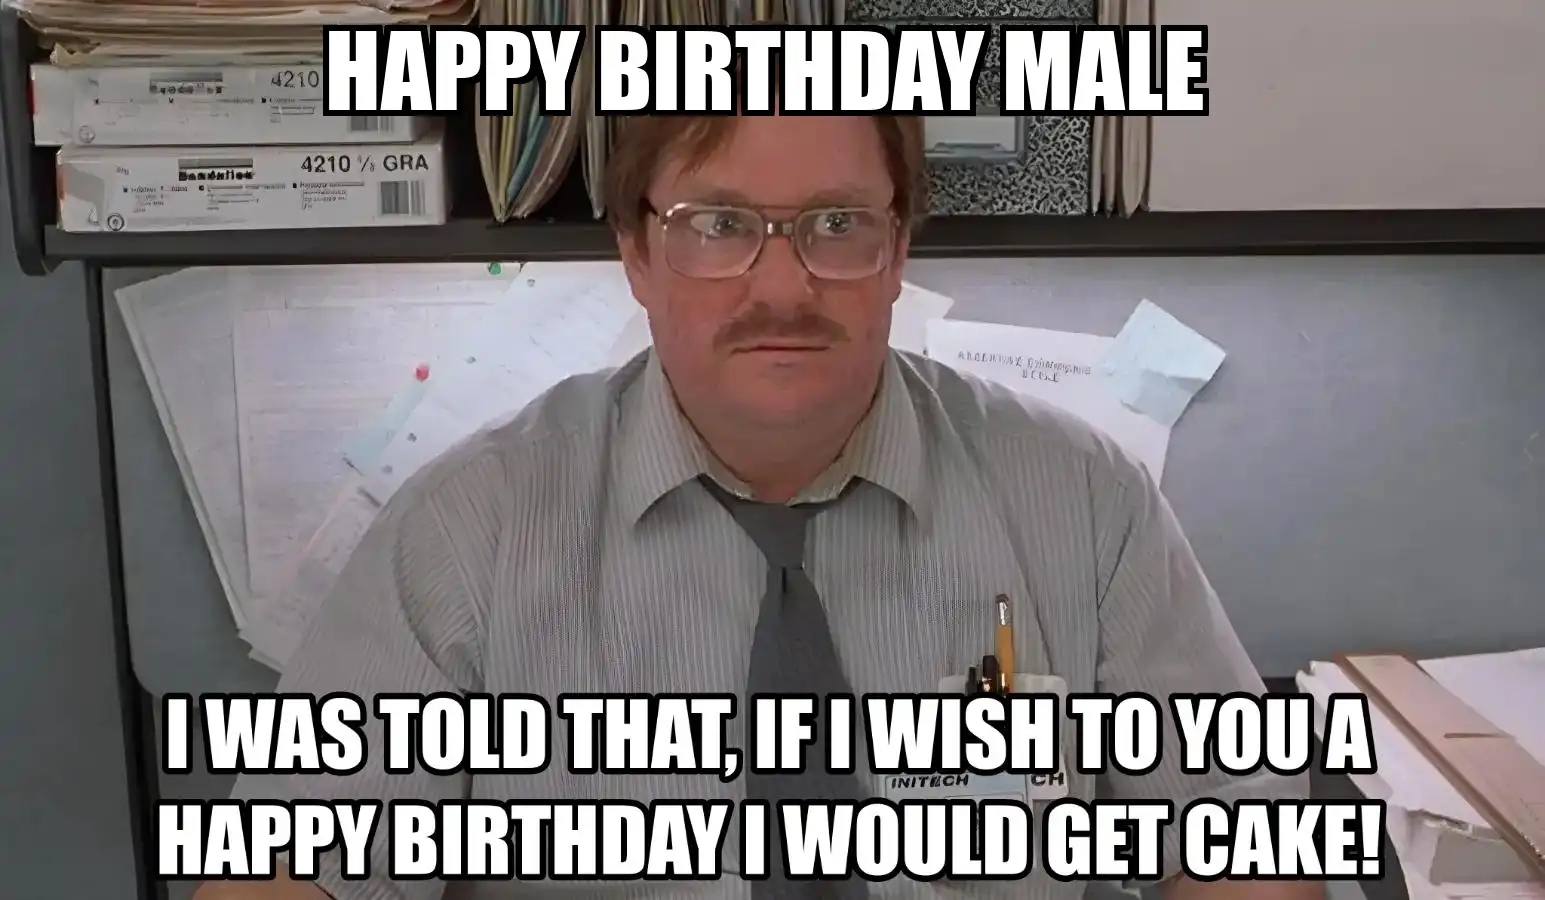 Happy Birthday Male I Would Get A Cake Meme